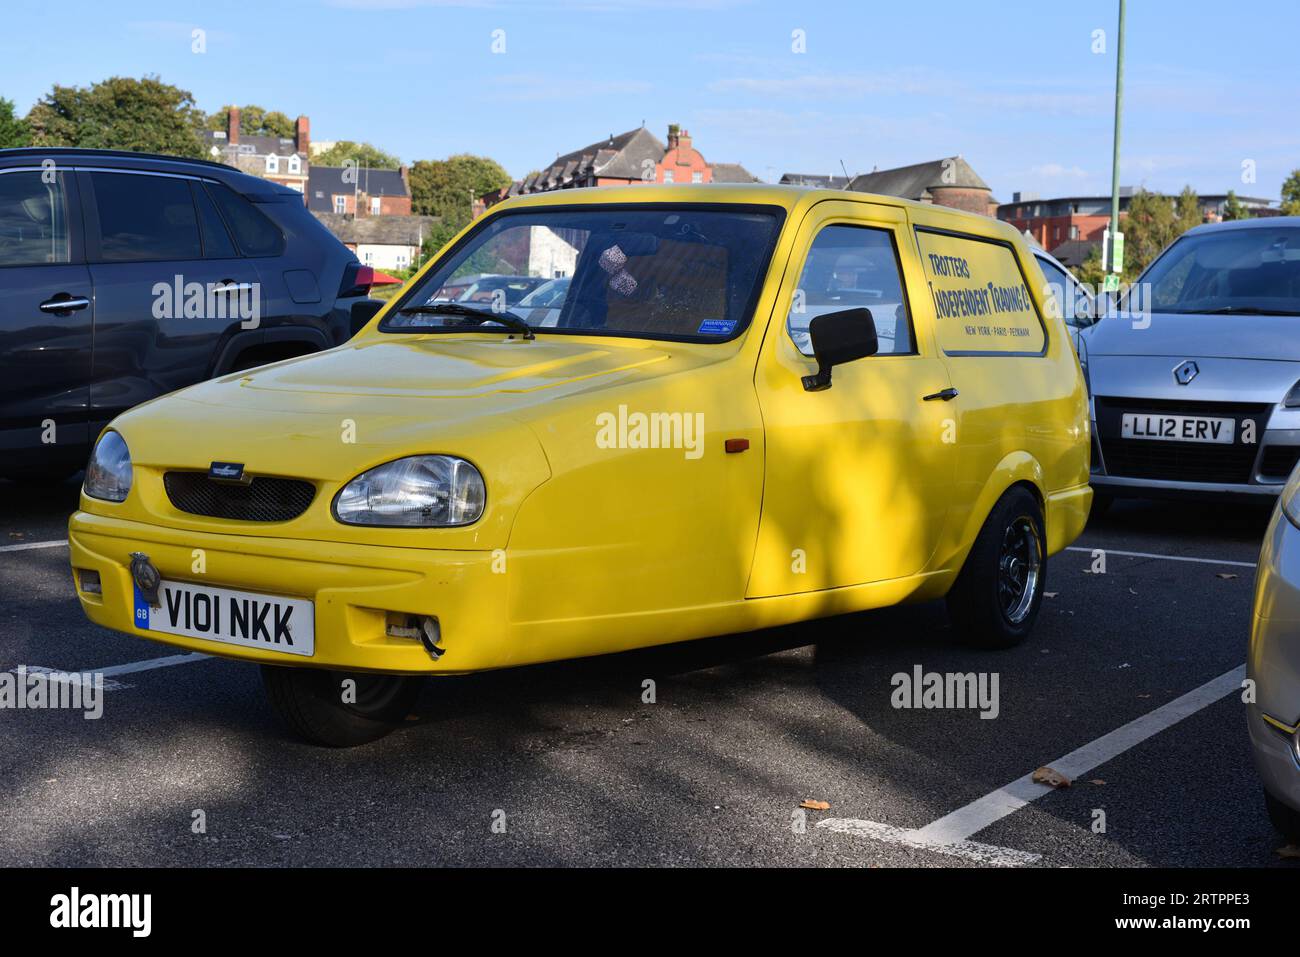 Reliant robin aus der beliebten Sitcom „Only Fools and Horses“. Stockfoto